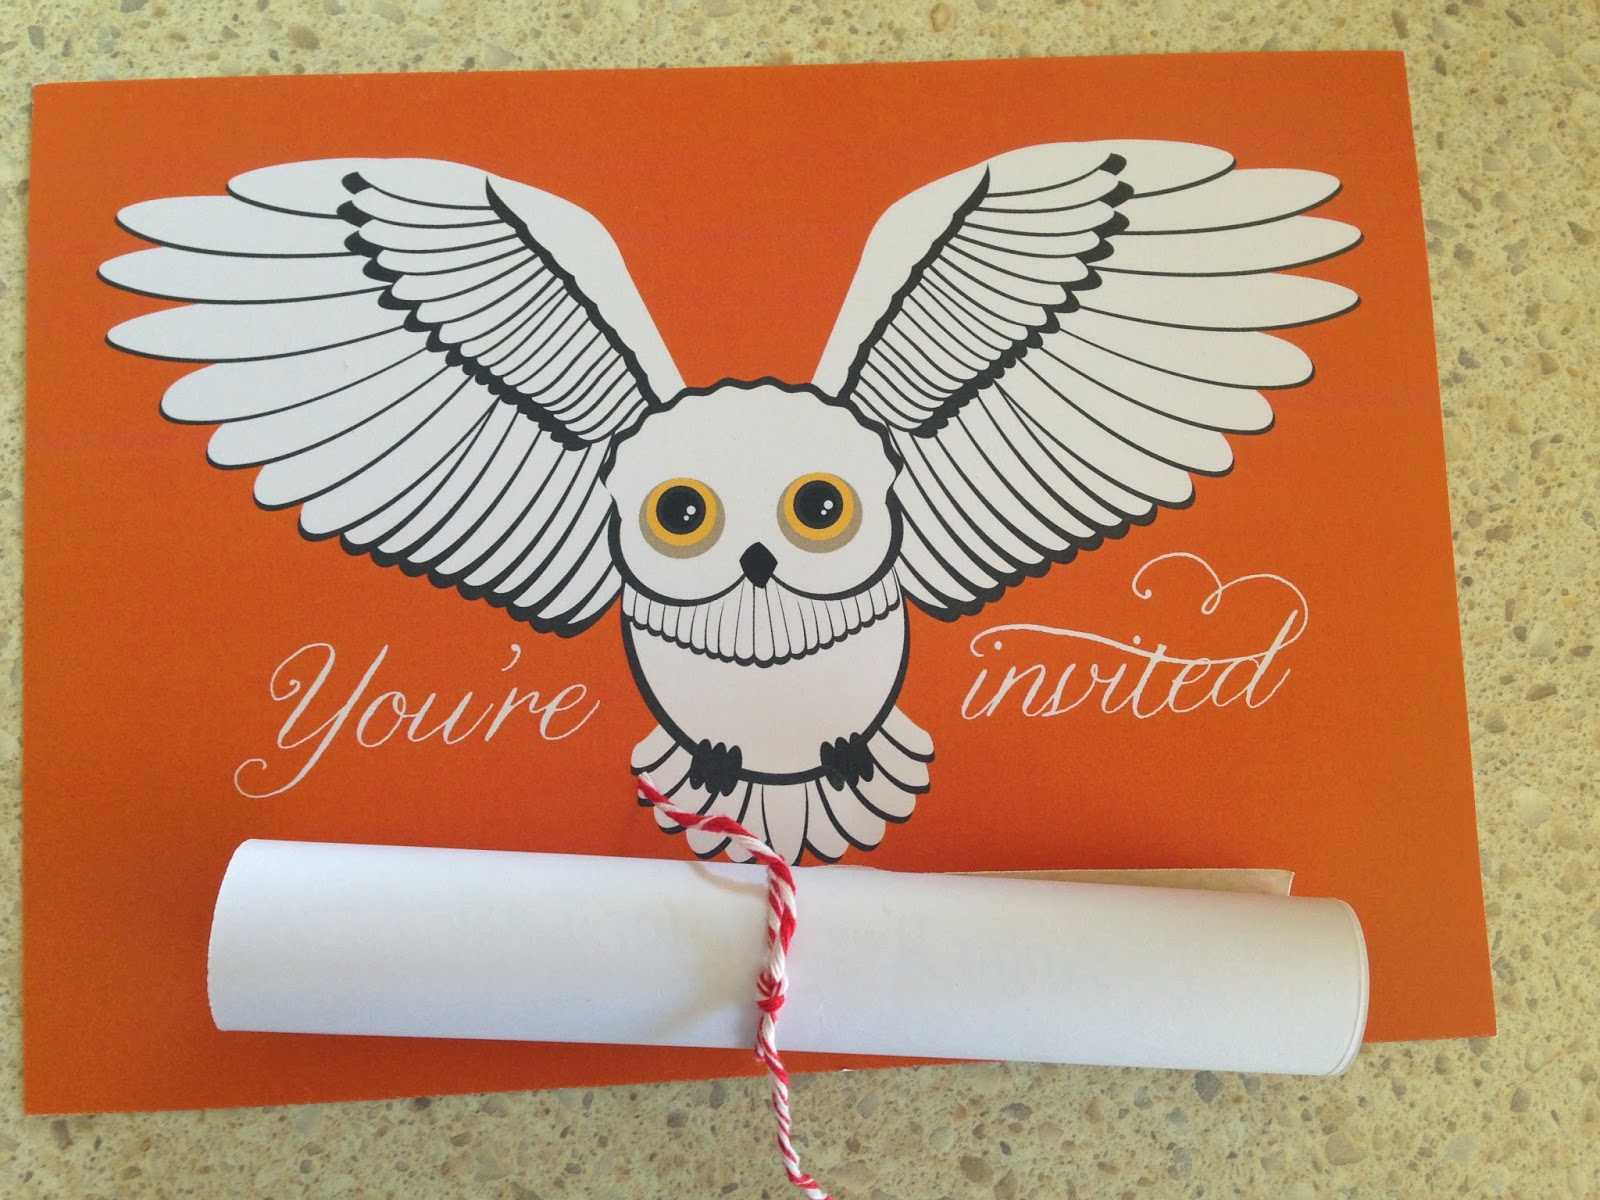 Harry Potter Party Invitations by Owl Post 